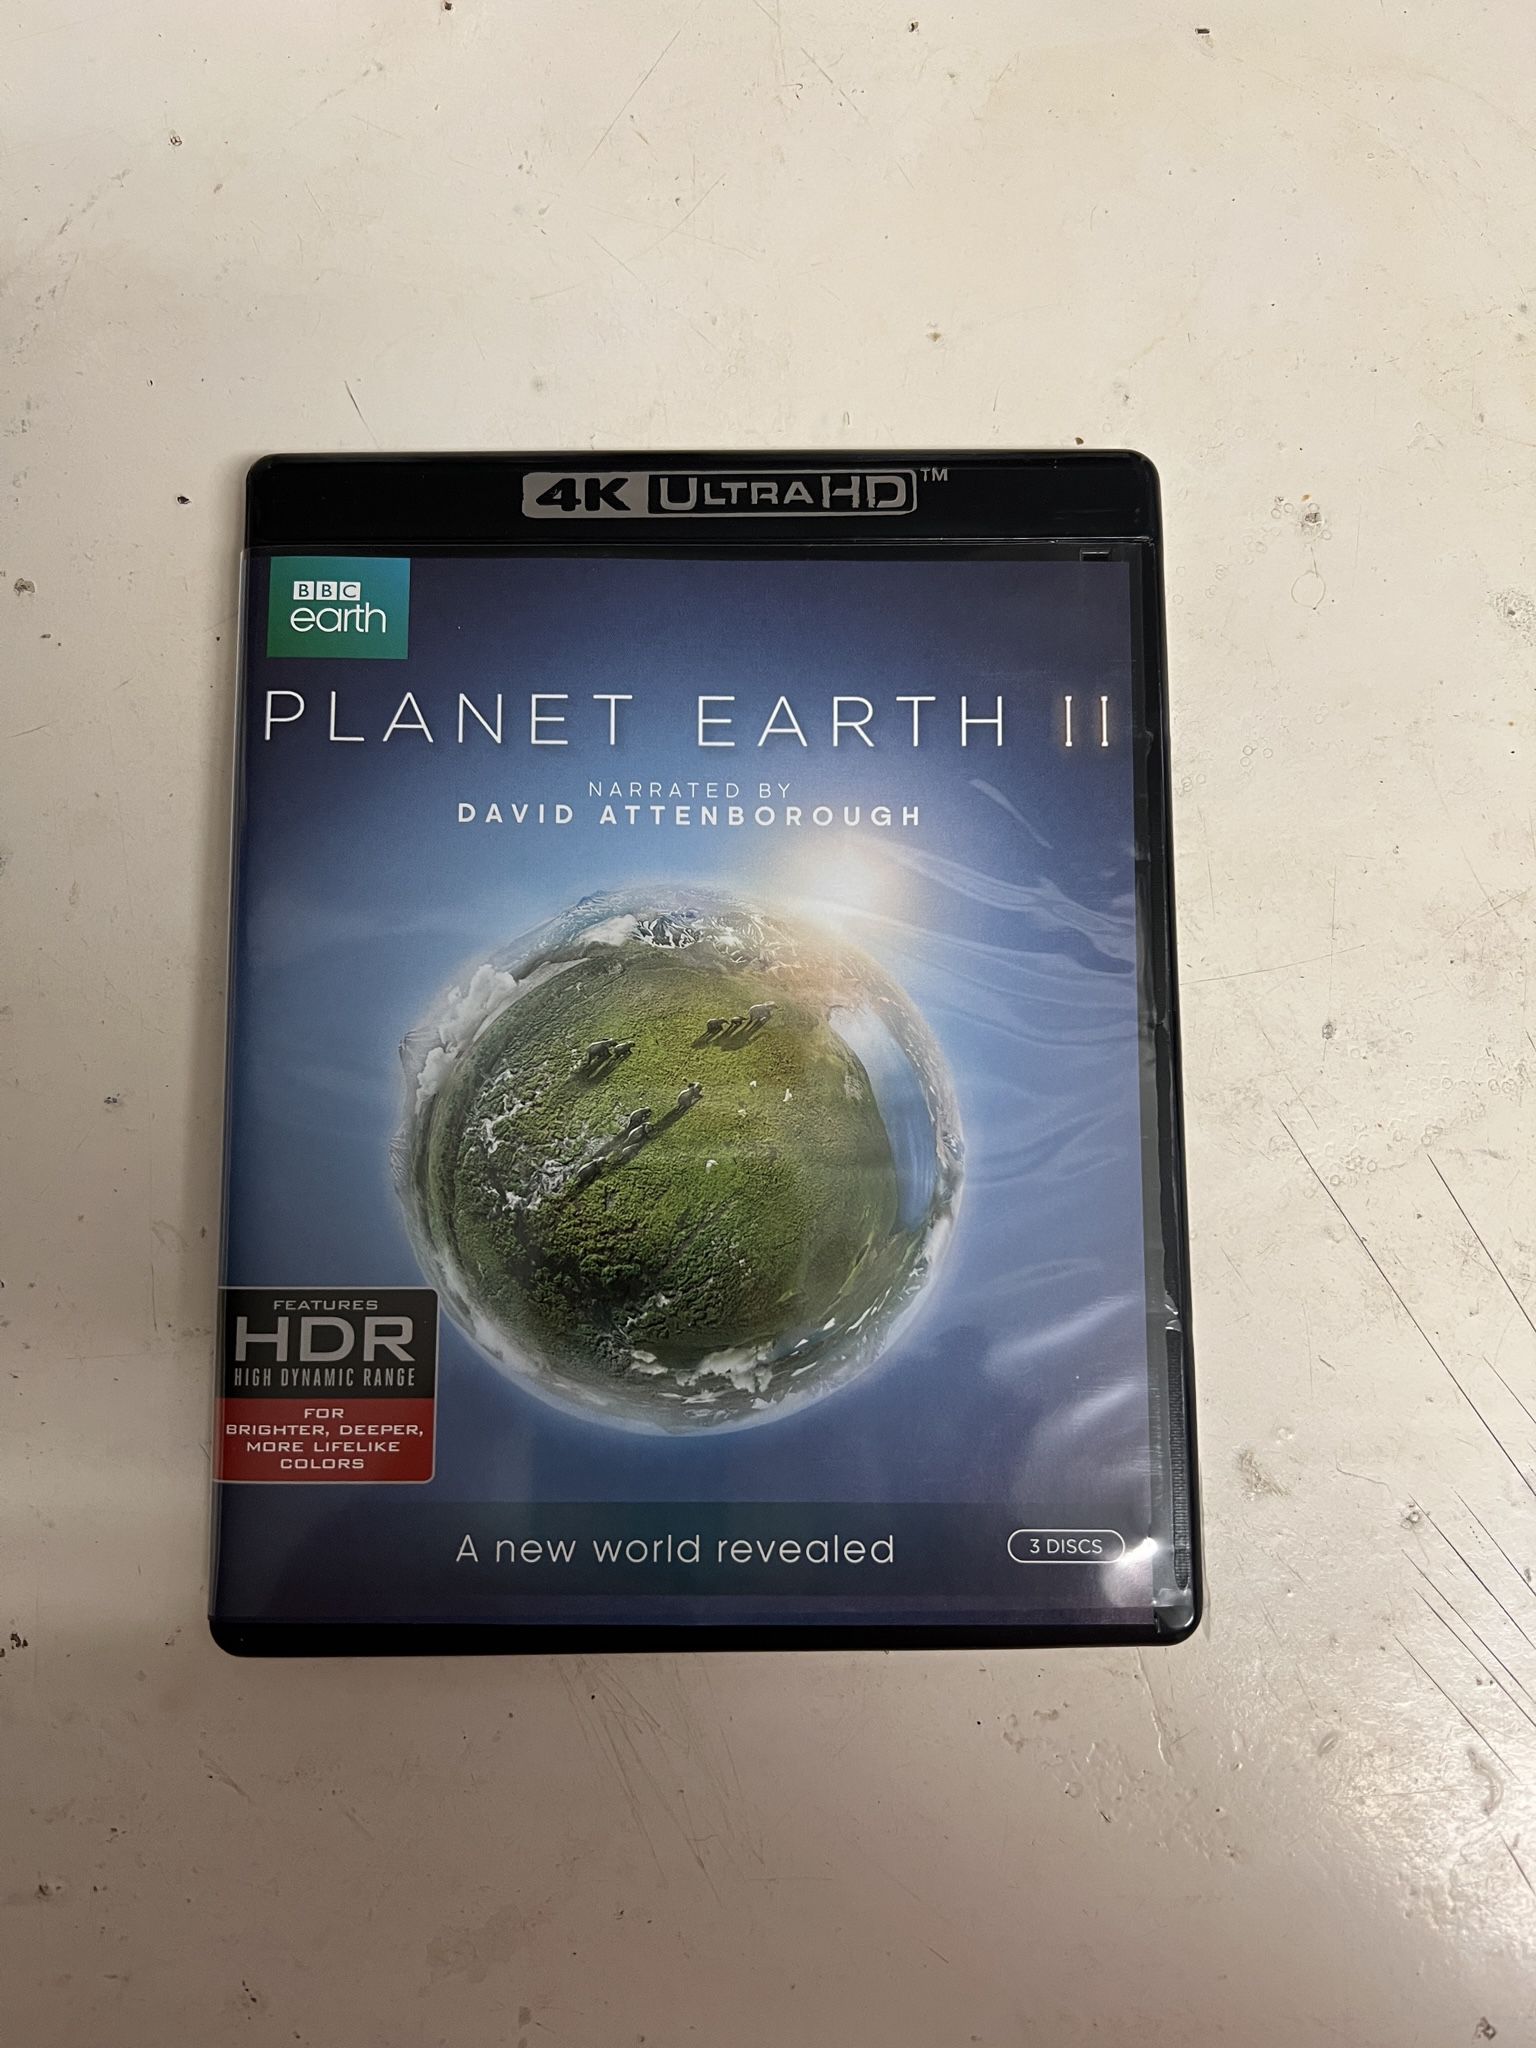 Planet Earth II HDR Blue Ray Disc Set